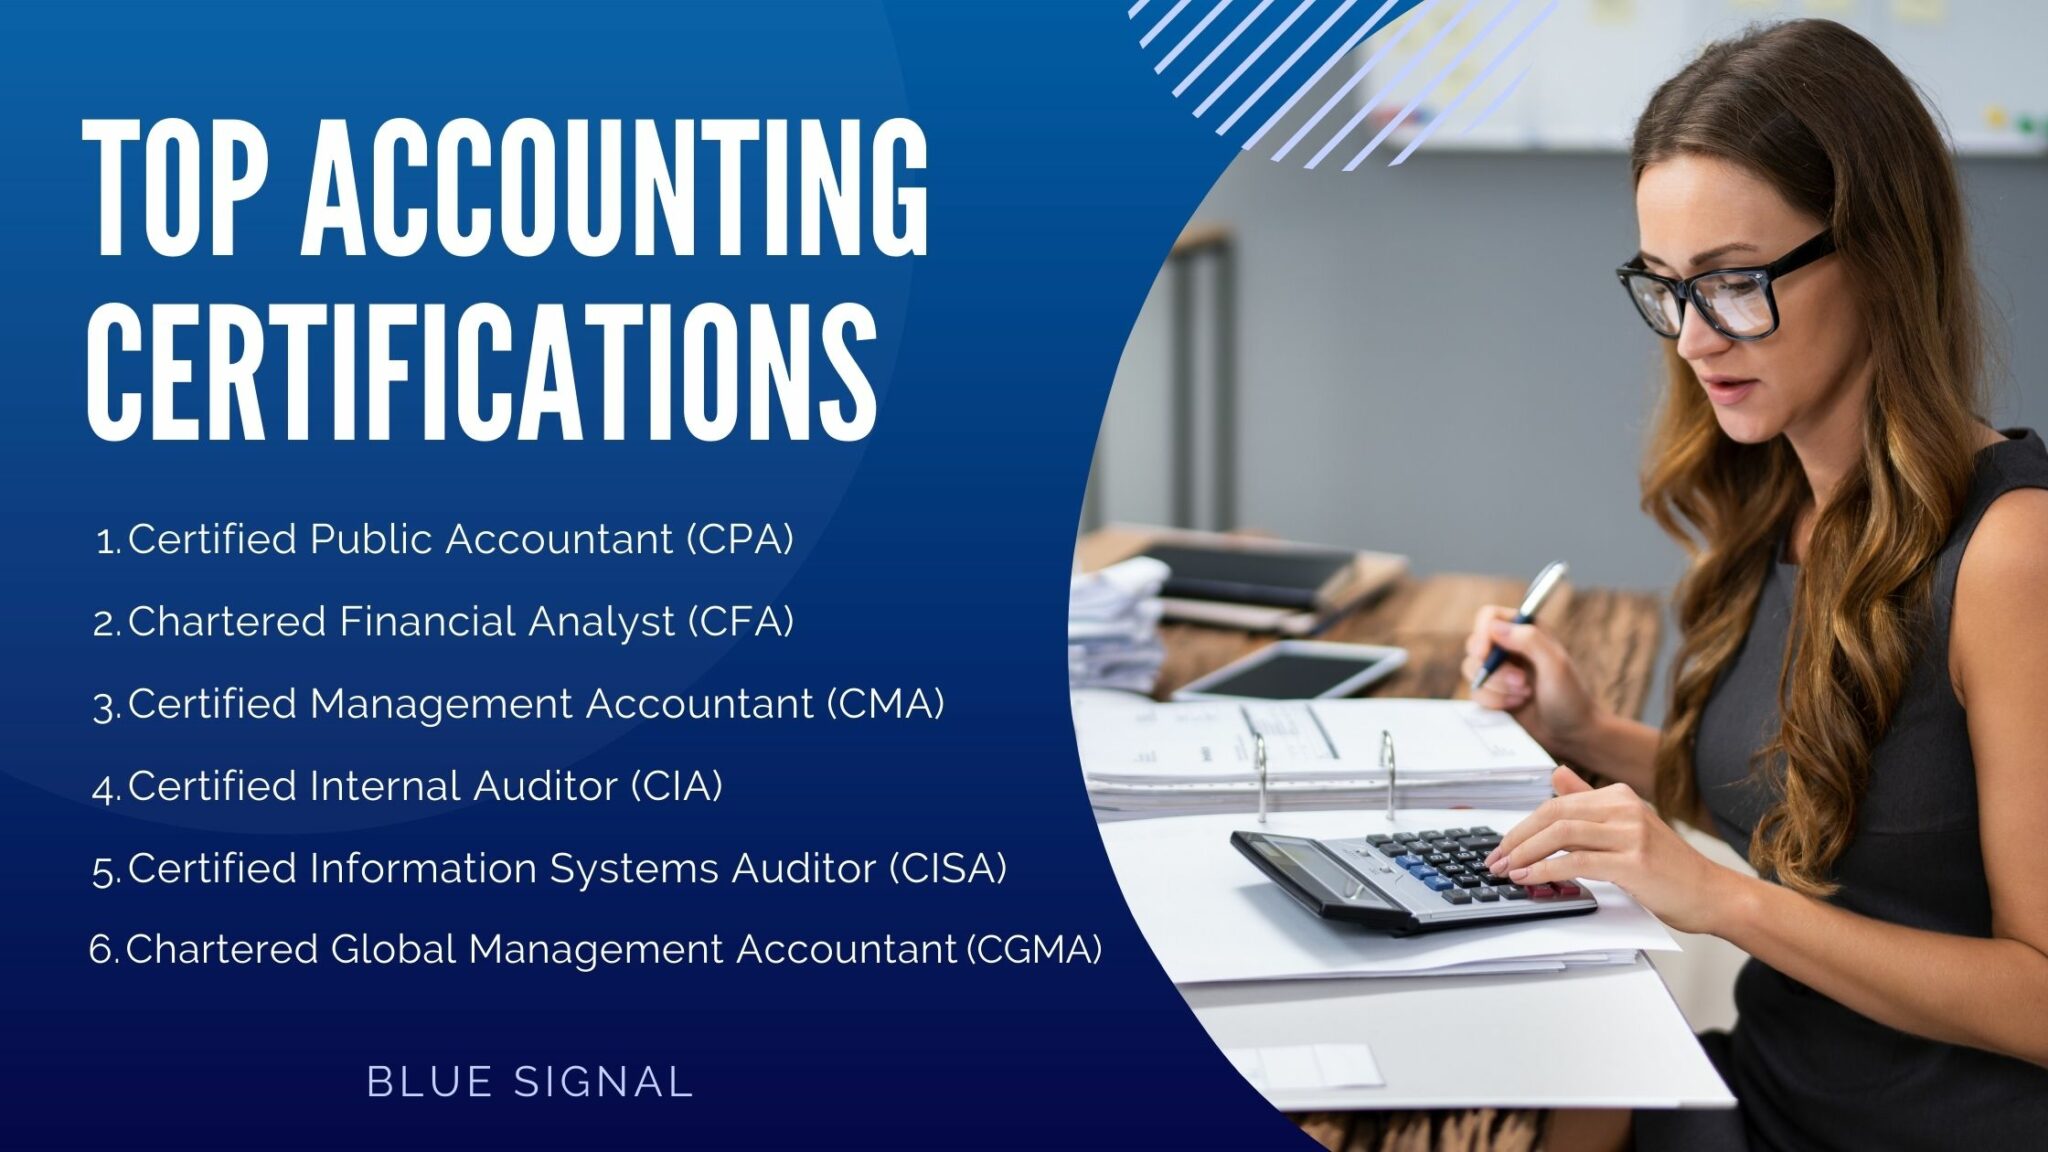 List of accounting certifications